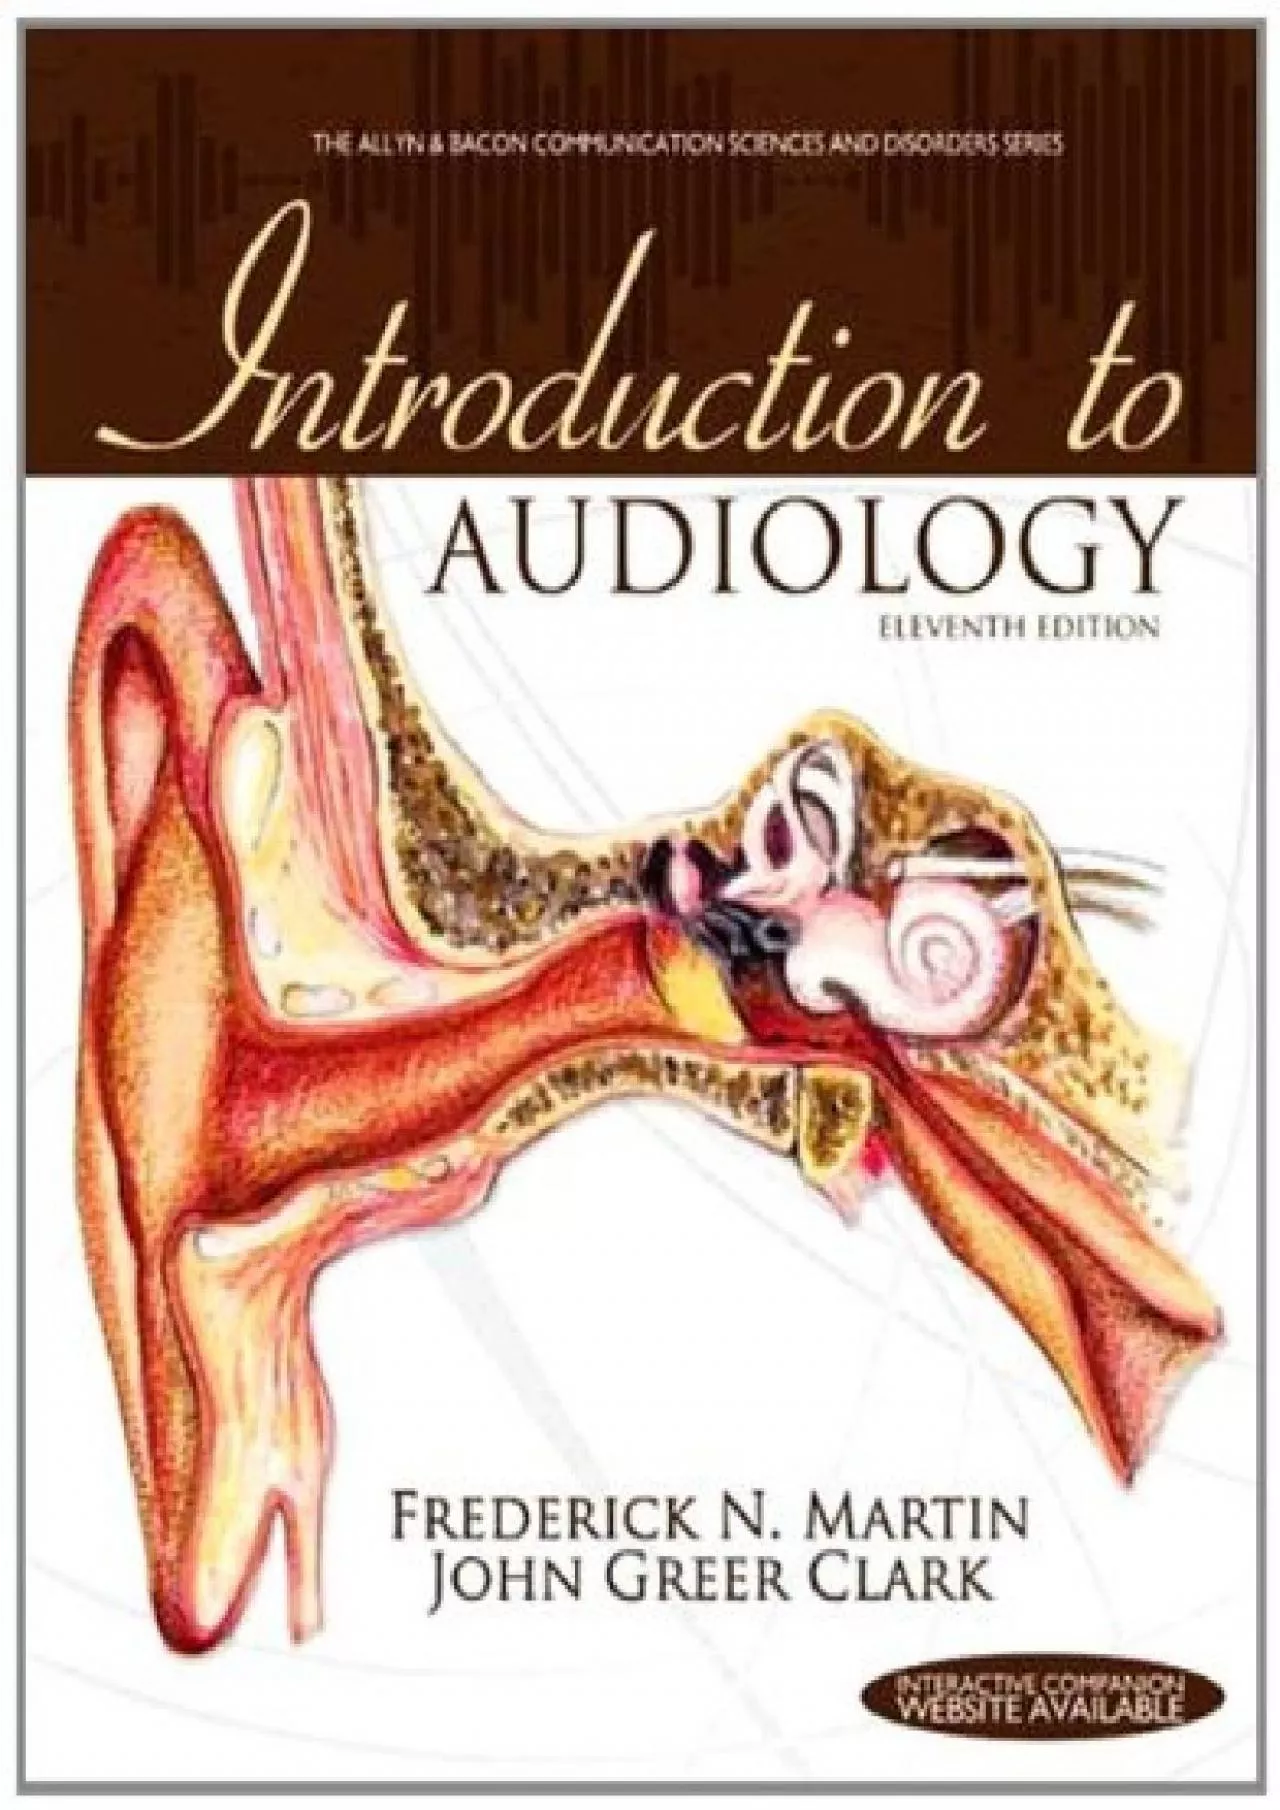 (DOWNLOAD)-Introduction to Audiology (The Allyn & Bacon Communication Sciences and Disorders